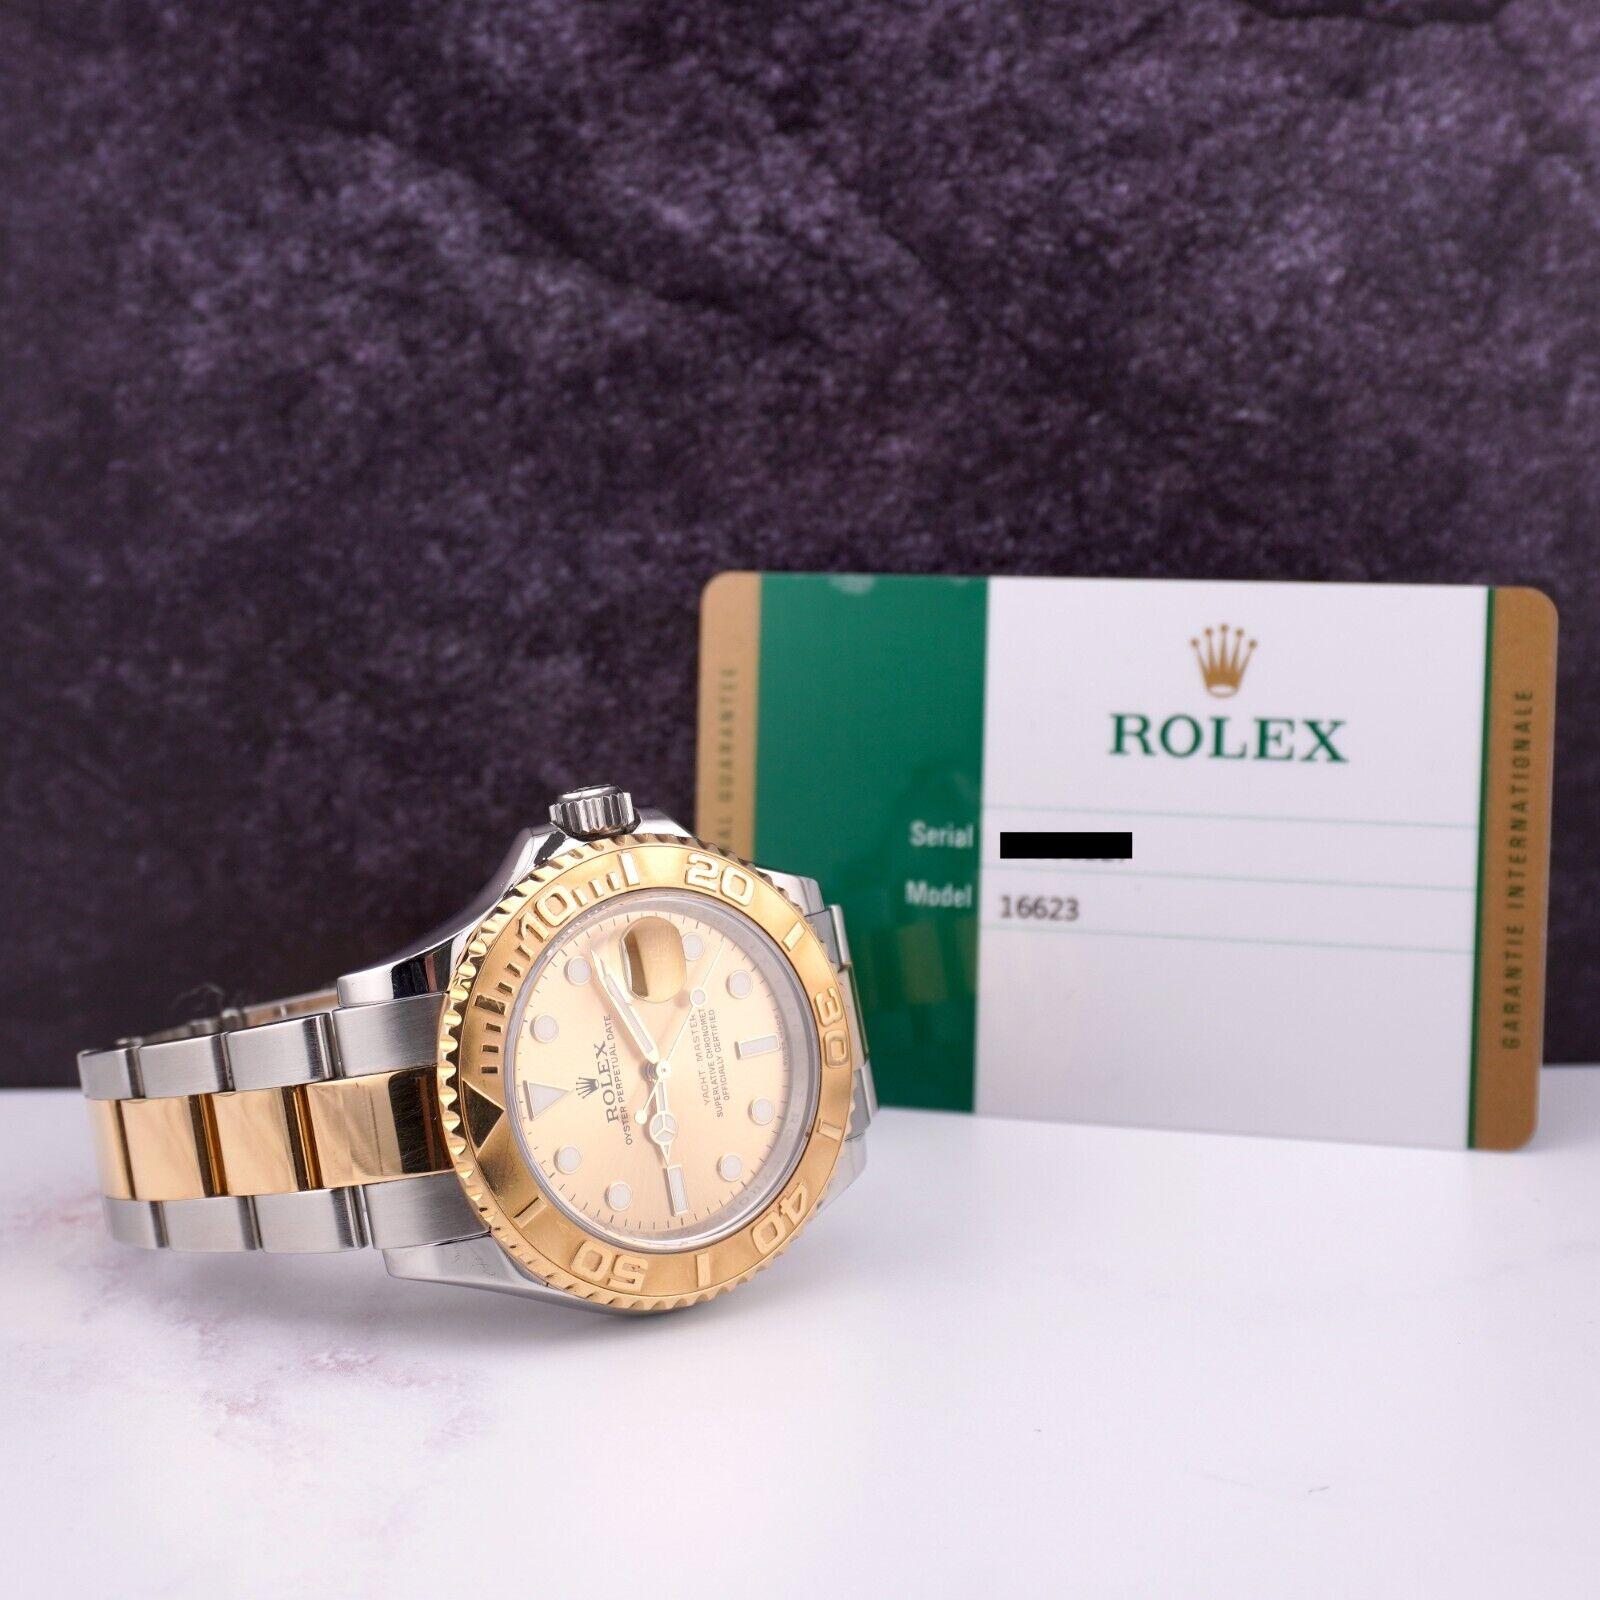 Rolex Yacht-Master 40mm Oyster Date 18k Yellow Gold & Steel Watch Dial 16623 For Sale 5